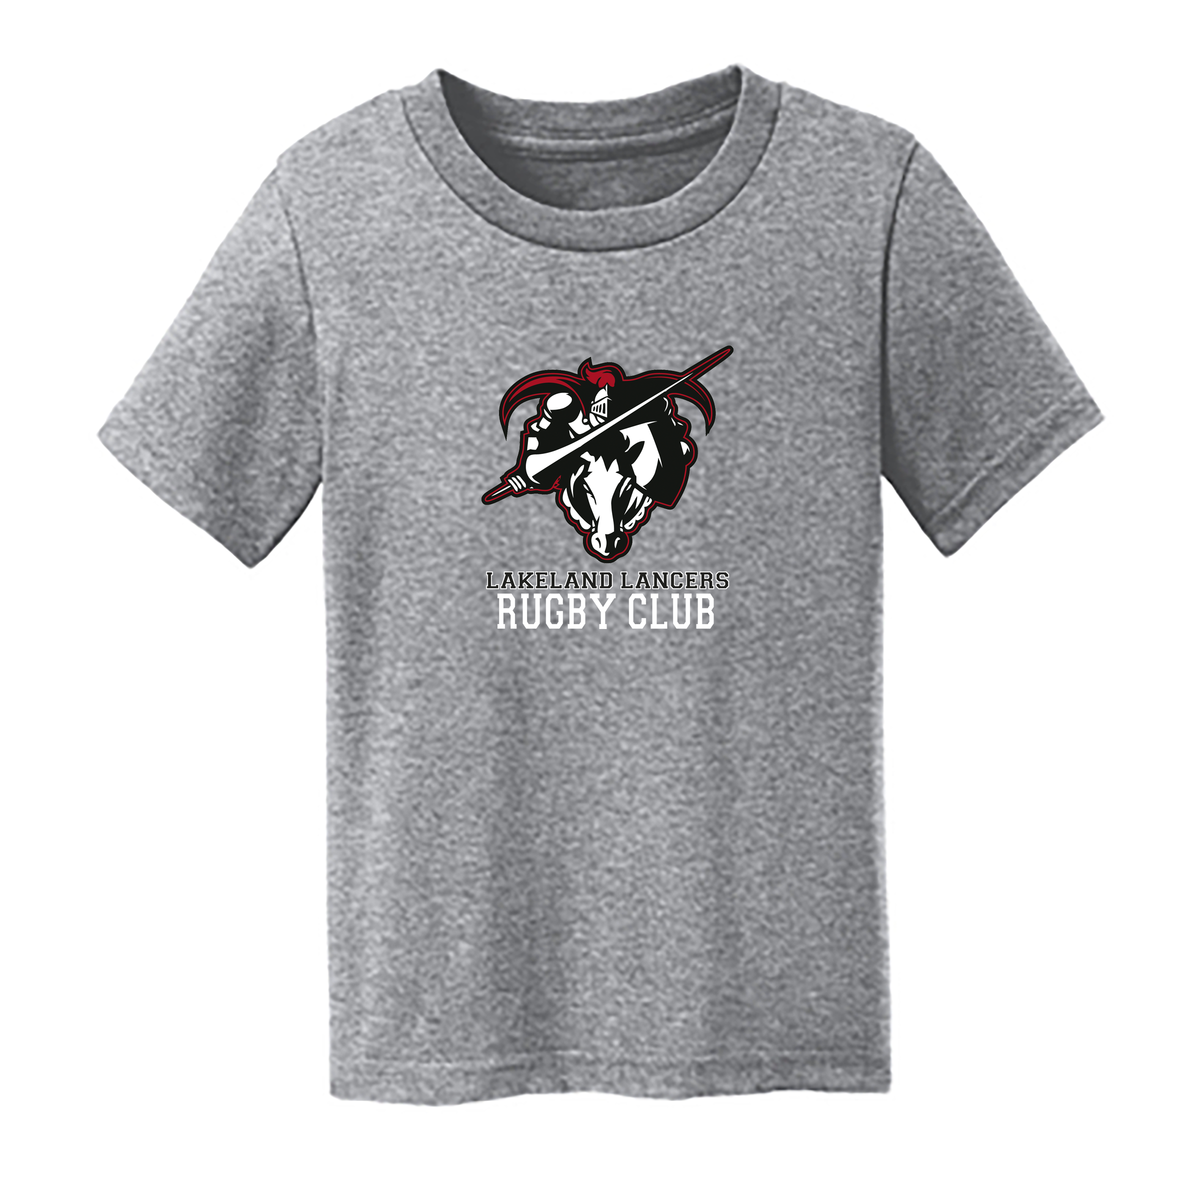 Legacy Volleyball Club Toddler Core Cotton Tee